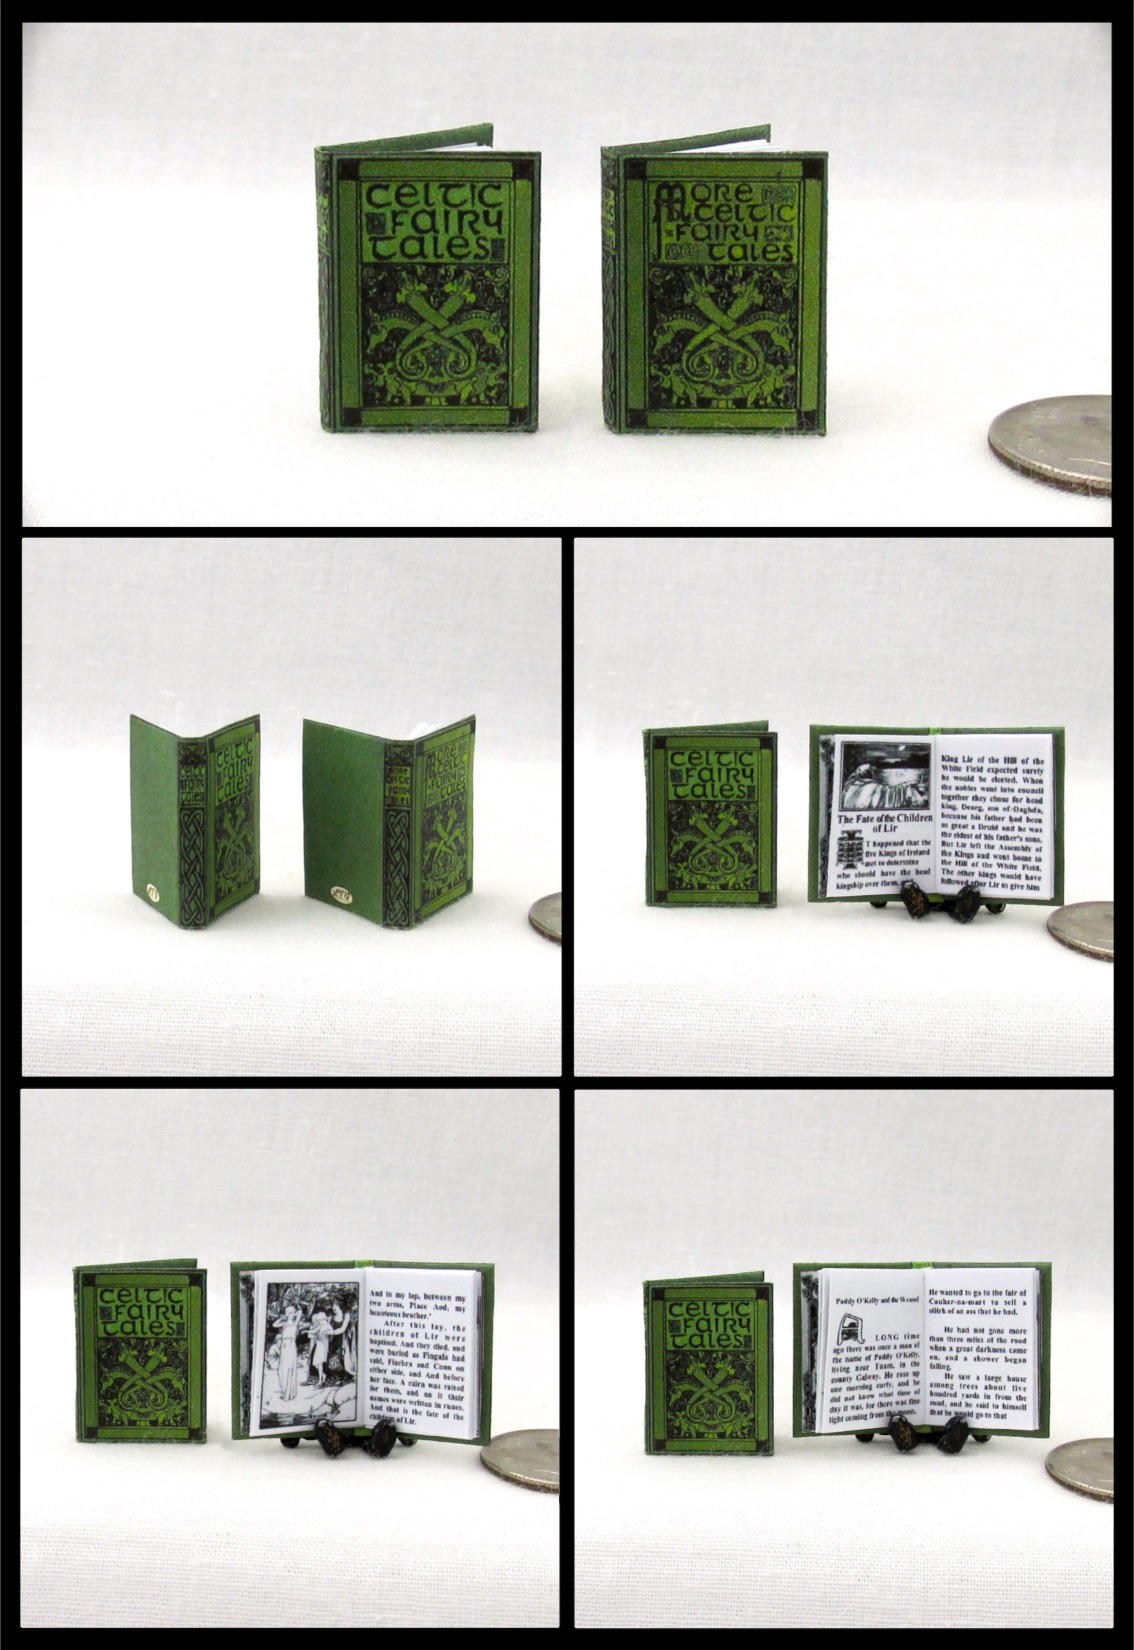 THE MYTHS OF NORSEMEN Miniature Dollhouse 1:12 Scale Readable Illustrated Book